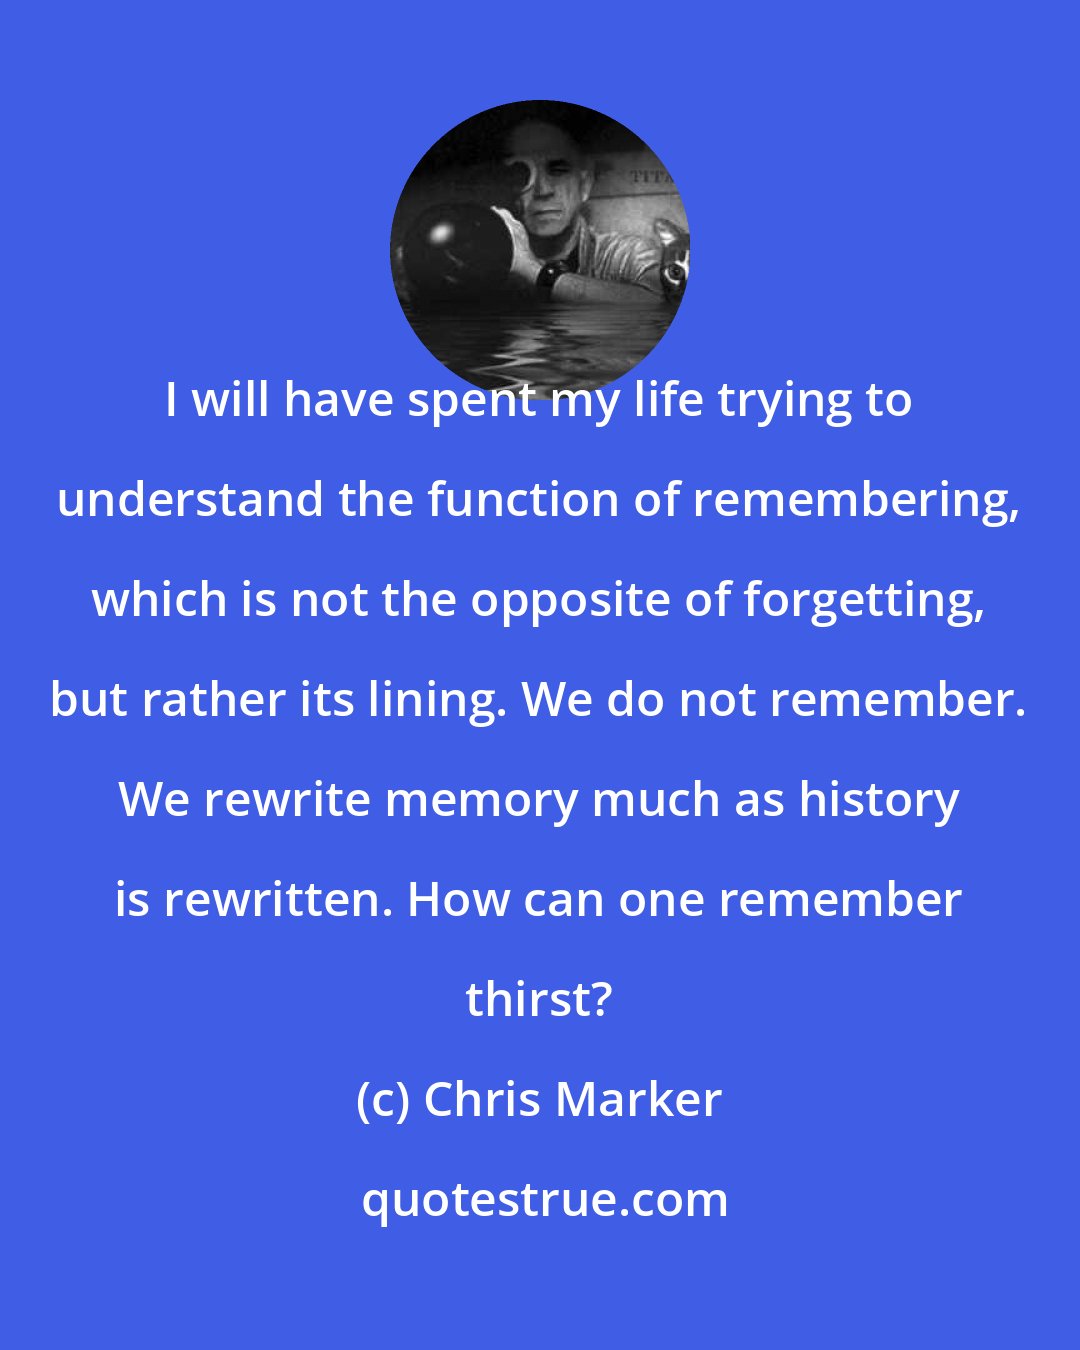 Chris Marker: I will have spent my life trying to understand the function of remembering, which is not the opposite of forgetting, but rather its lining. We do not remember. We rewrite memory much as history is rewritten. How can one remember thirst?